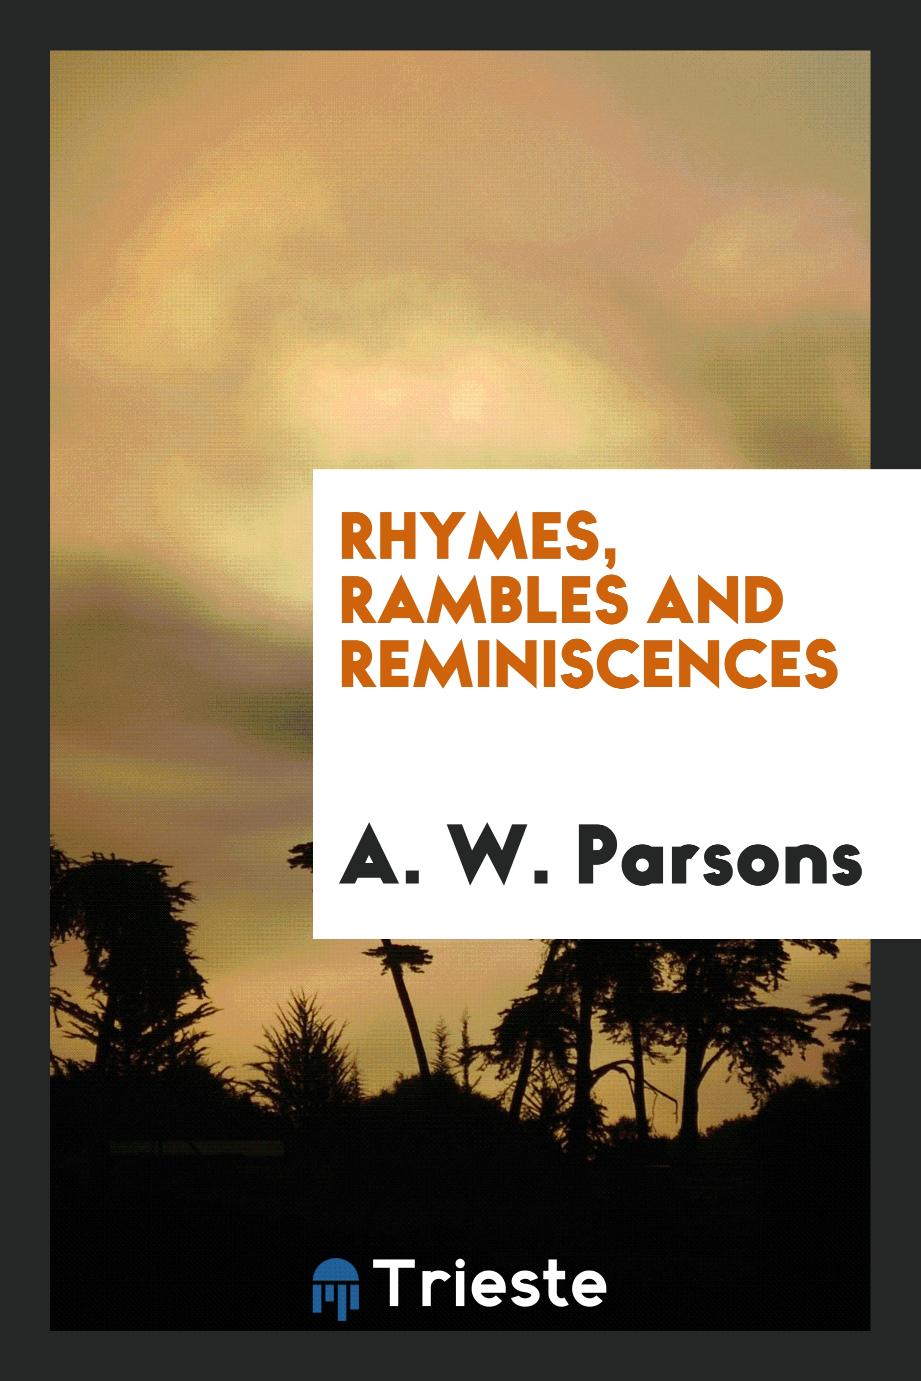 Rhymes, Rambles and Reminiscences